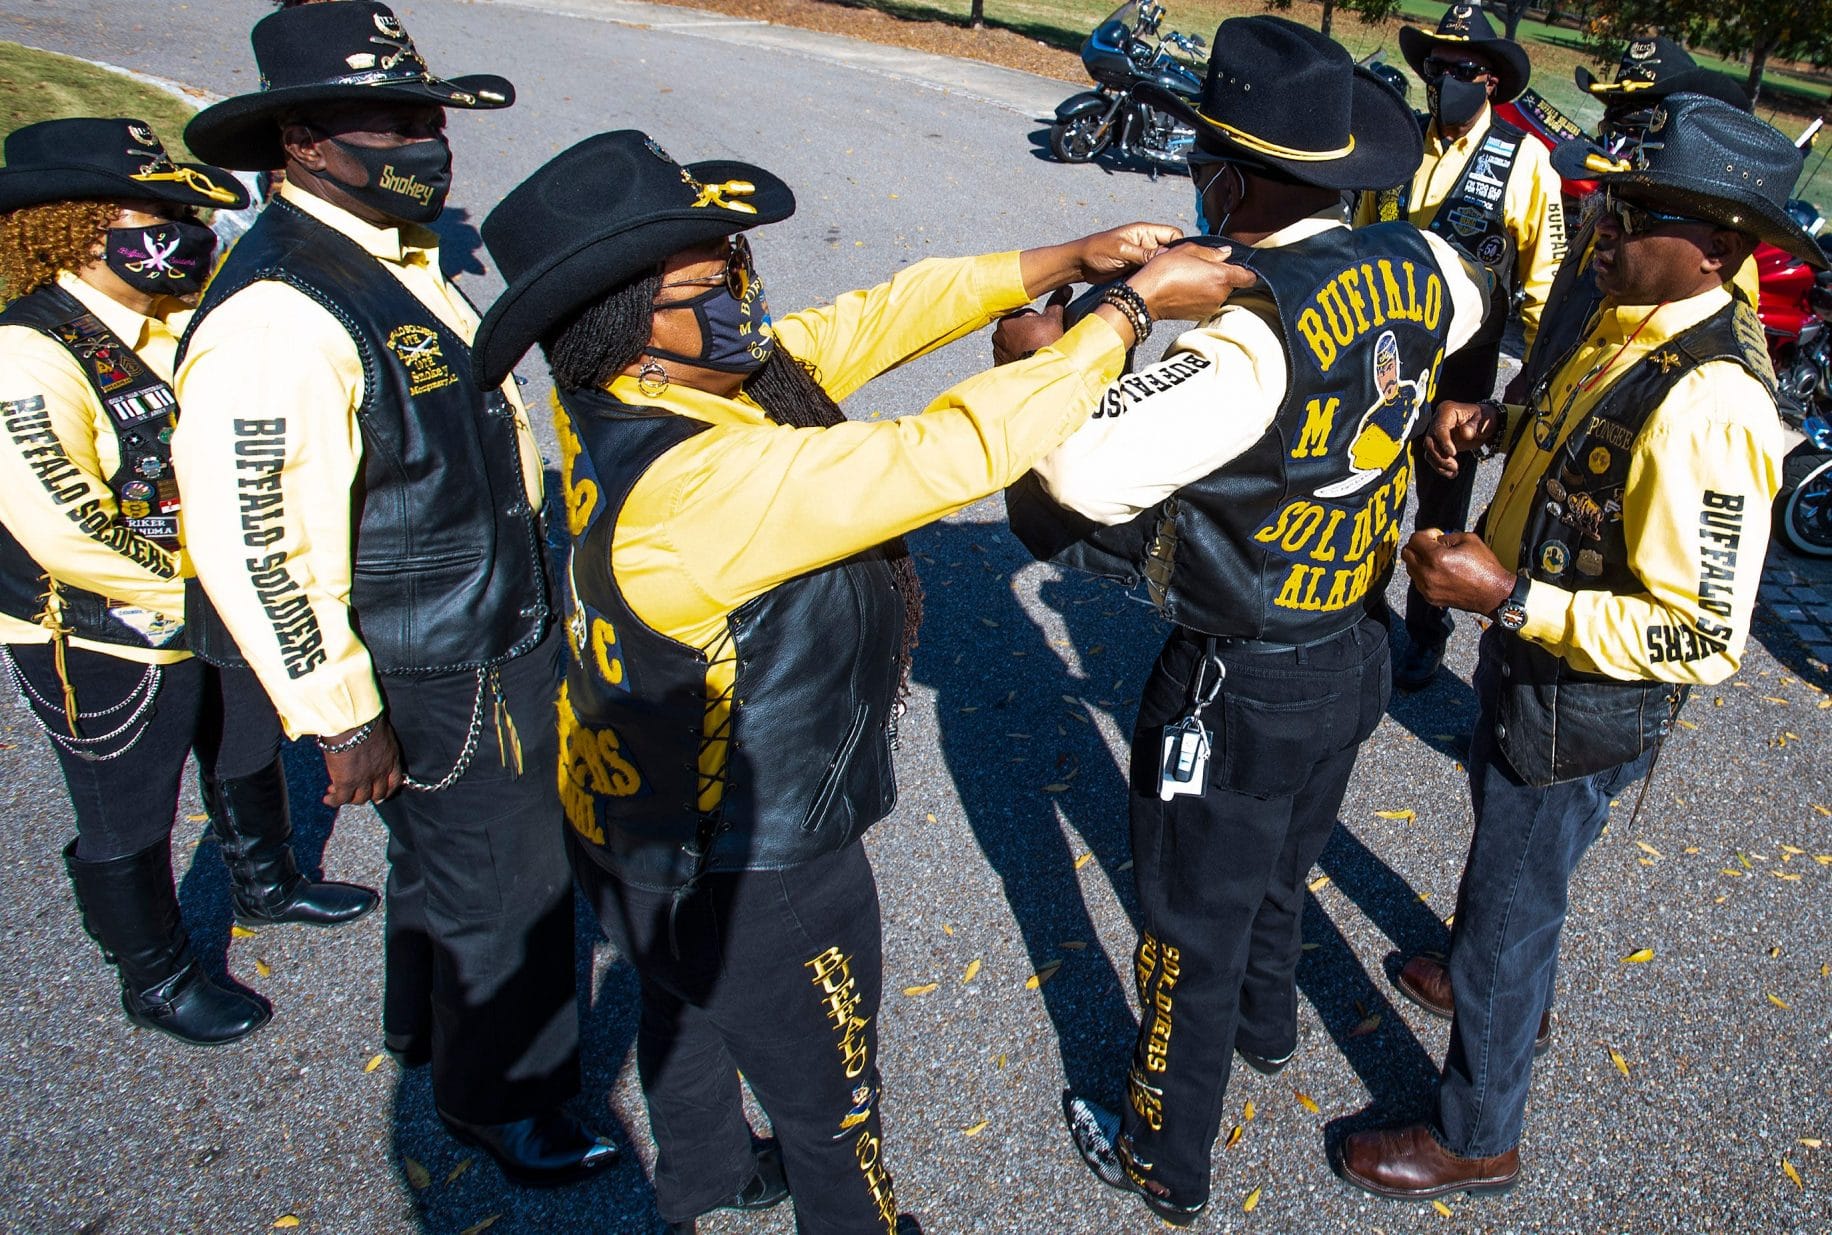 Pics: World's largest Black motorcycle club honors legacy of Buffalo